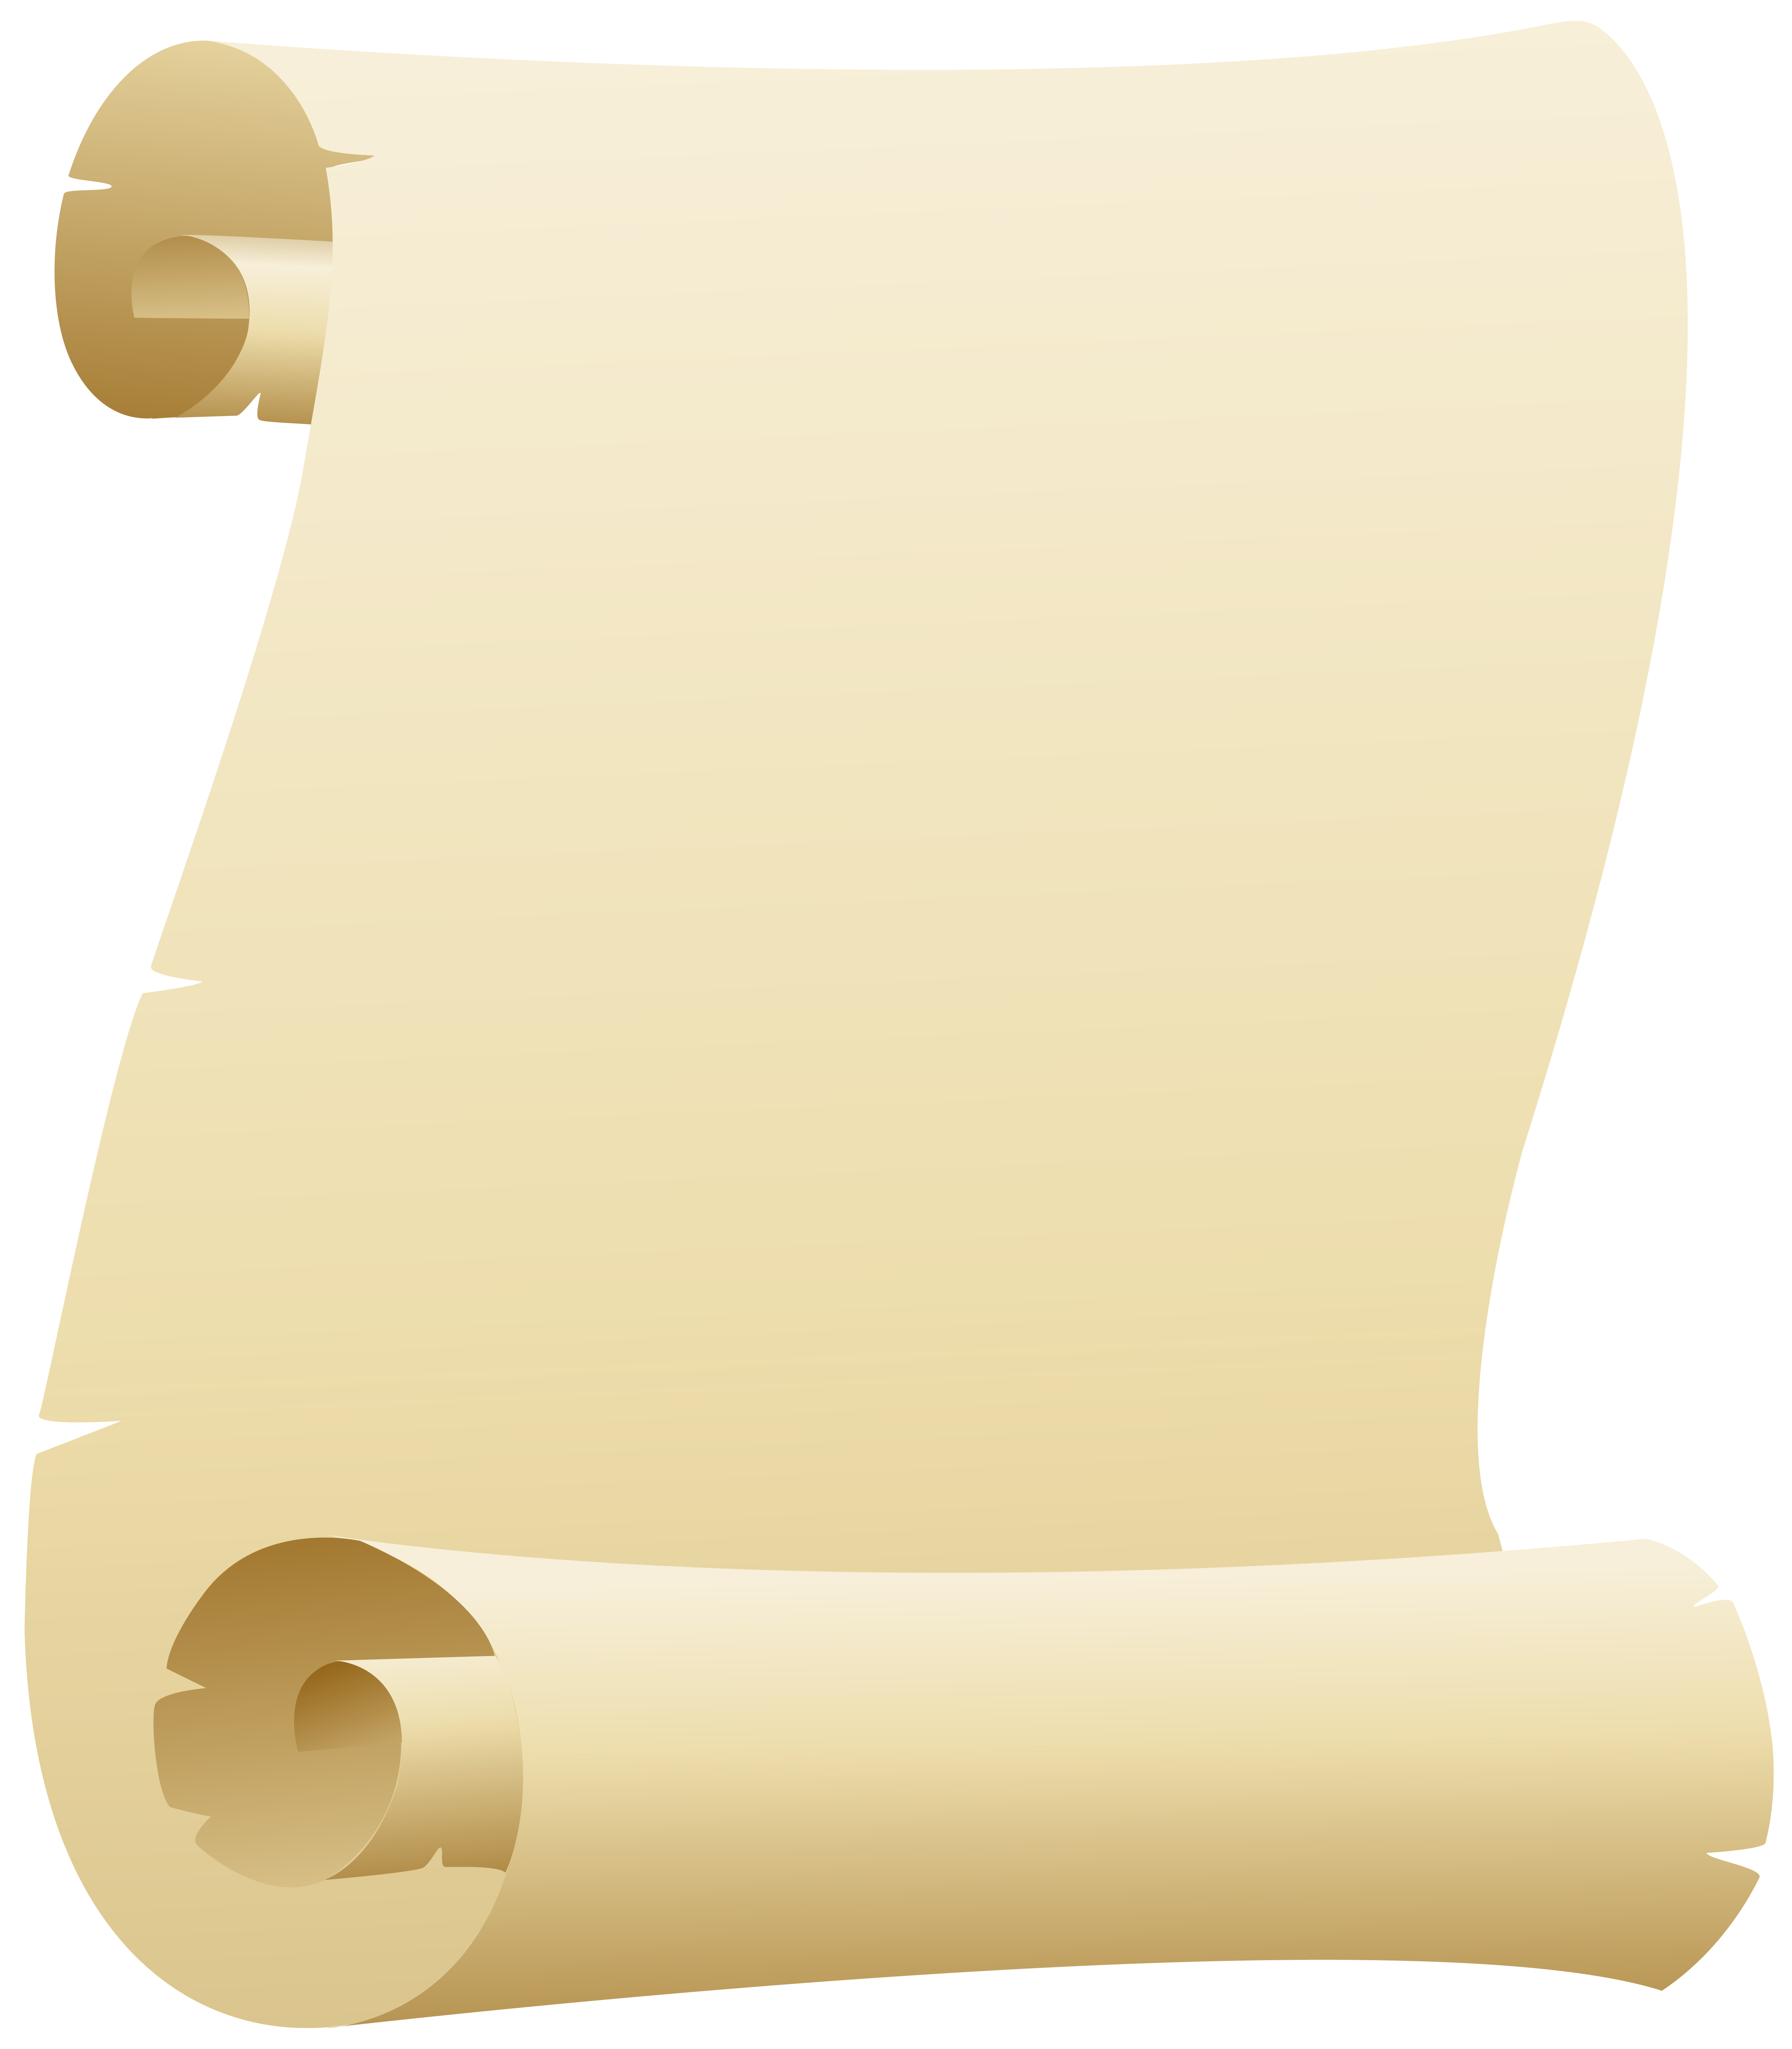 Scroll clipart png.